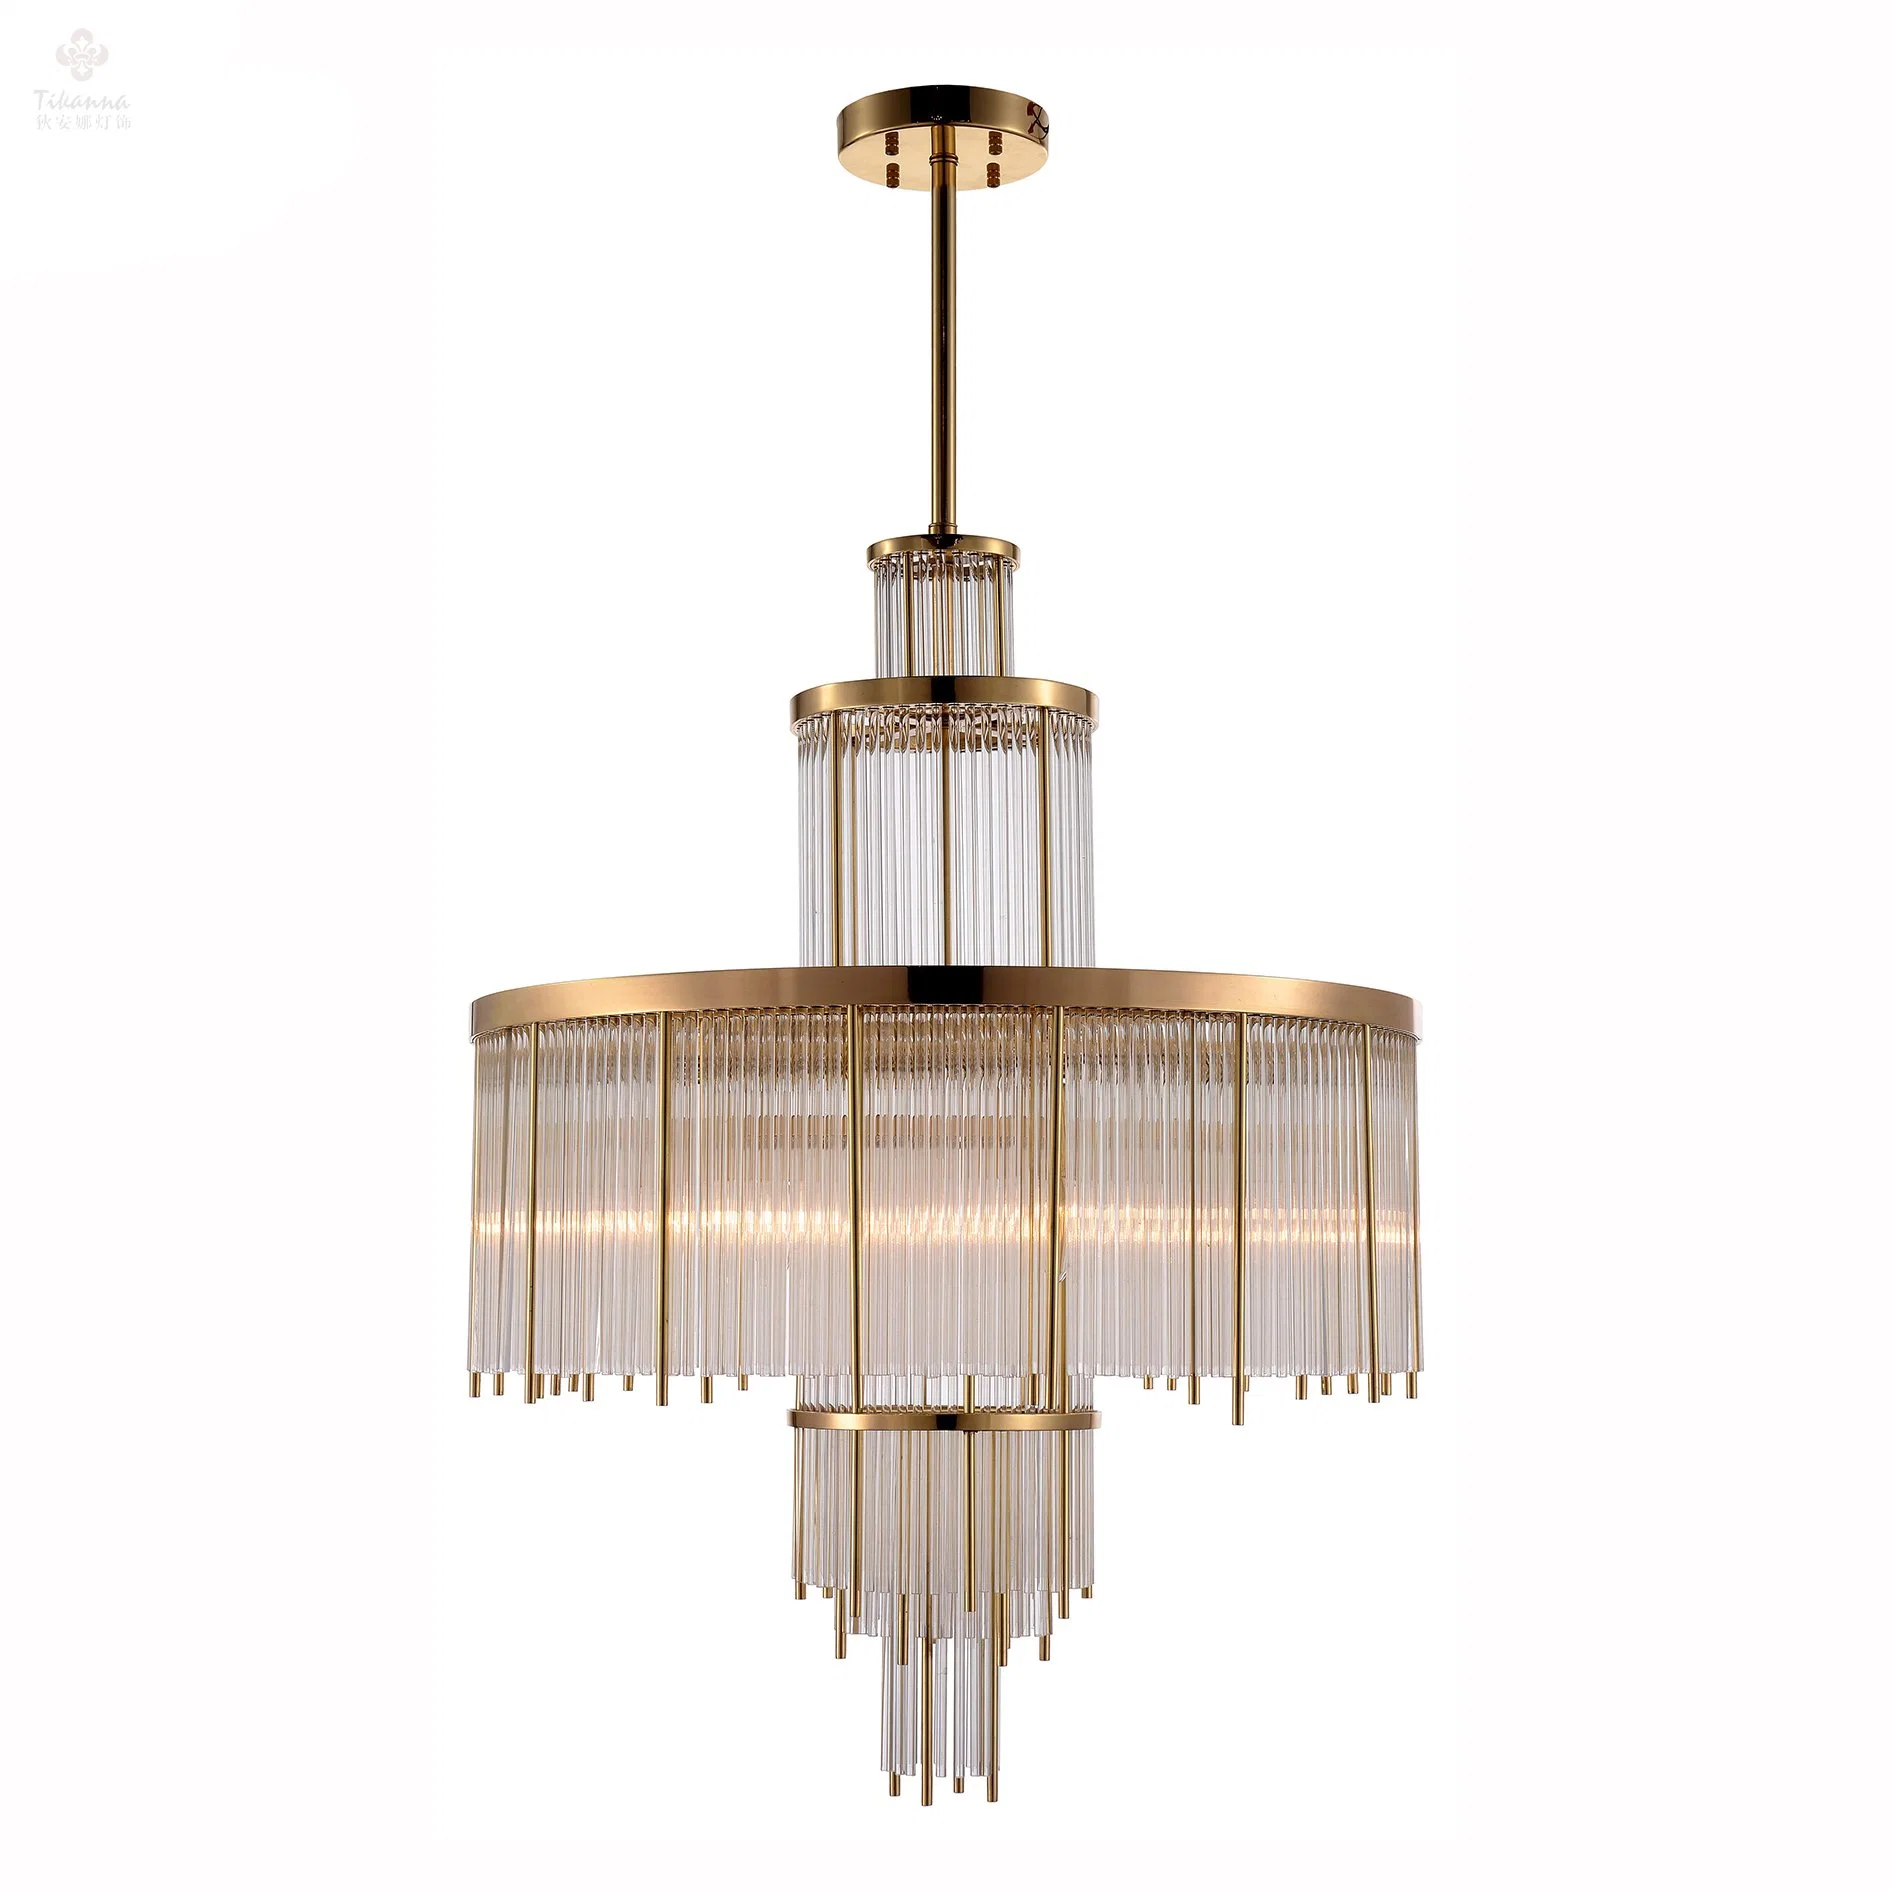 Tikanna New 2021 Modern Clear Crystal Glass Brass Round Pendant Chandelier Lamp for Home Decoration